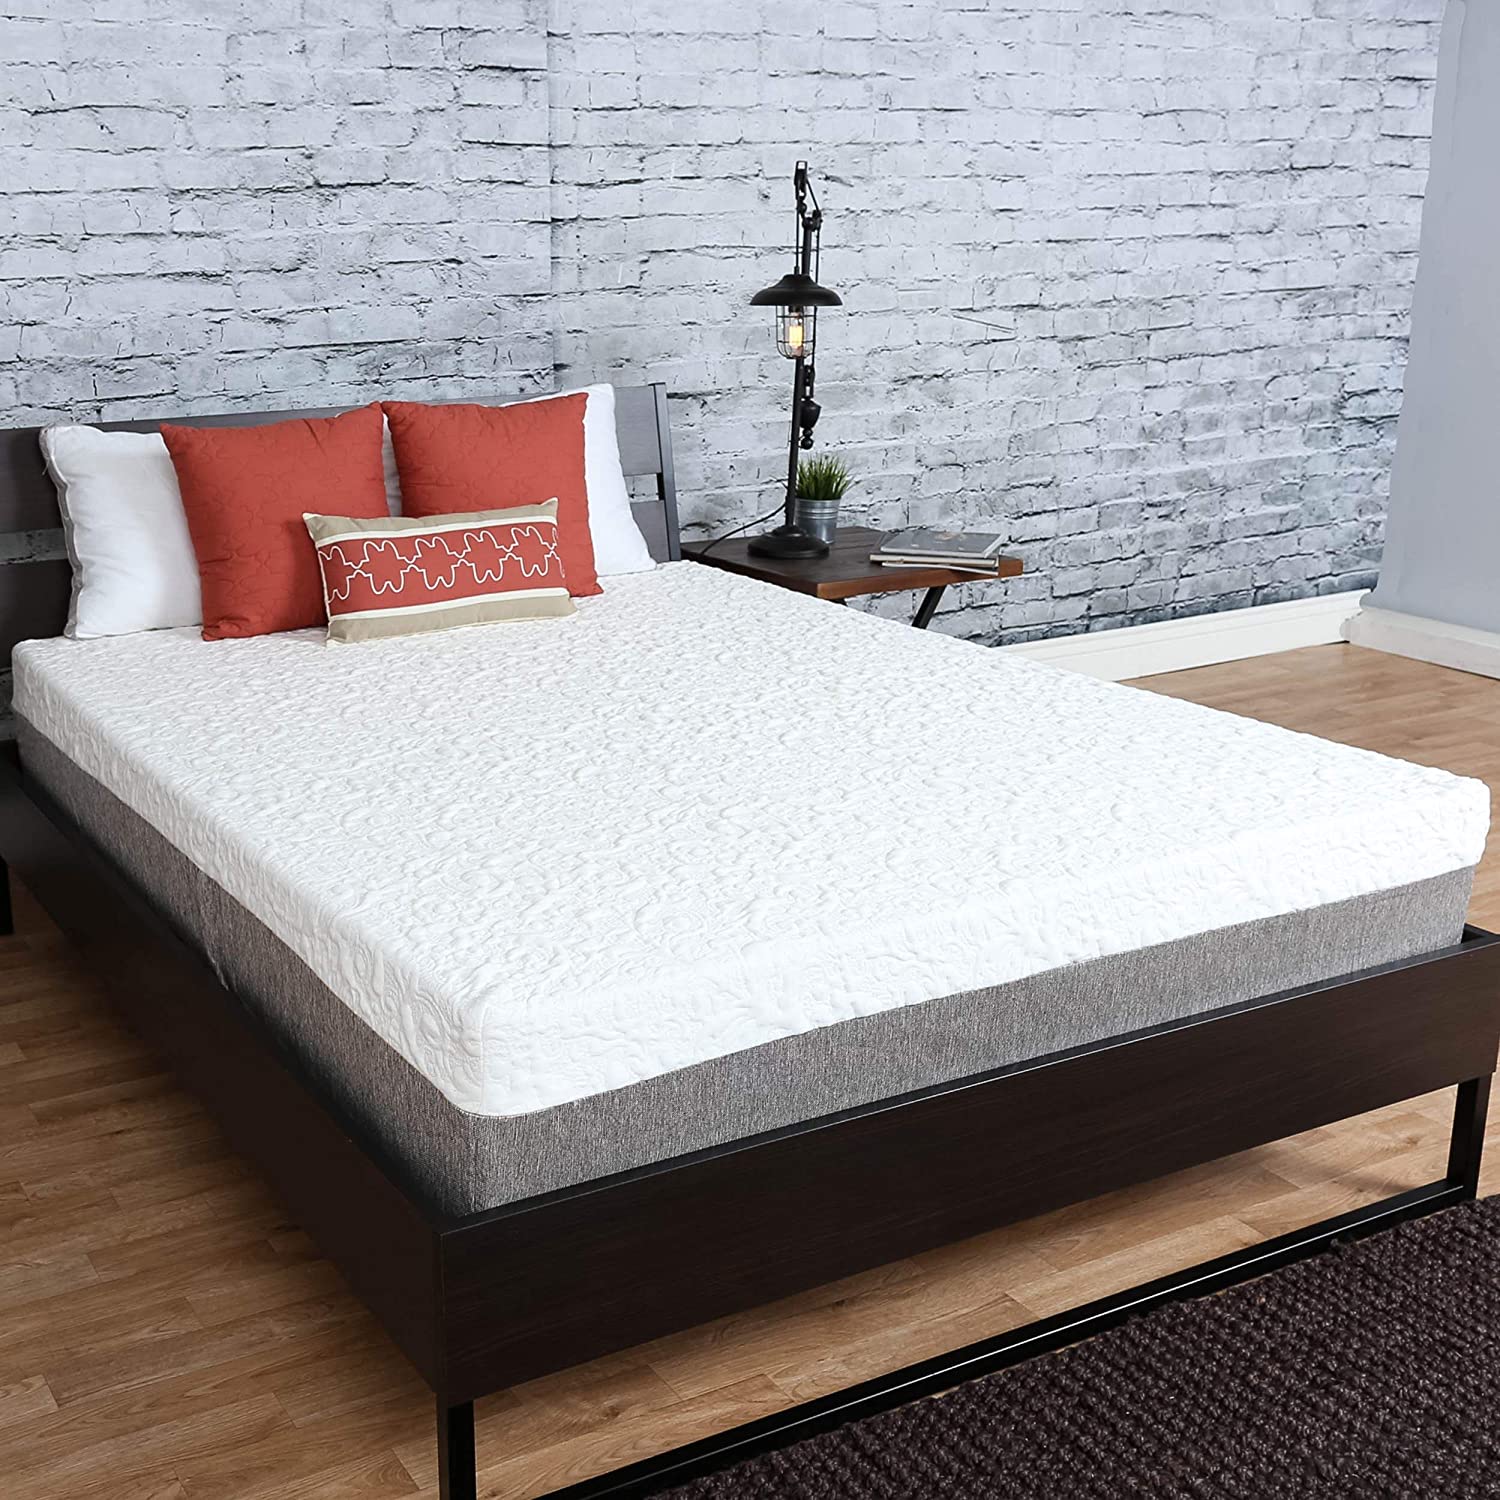 The Latest Full Xl Mattress Has Finally Been Revealed!